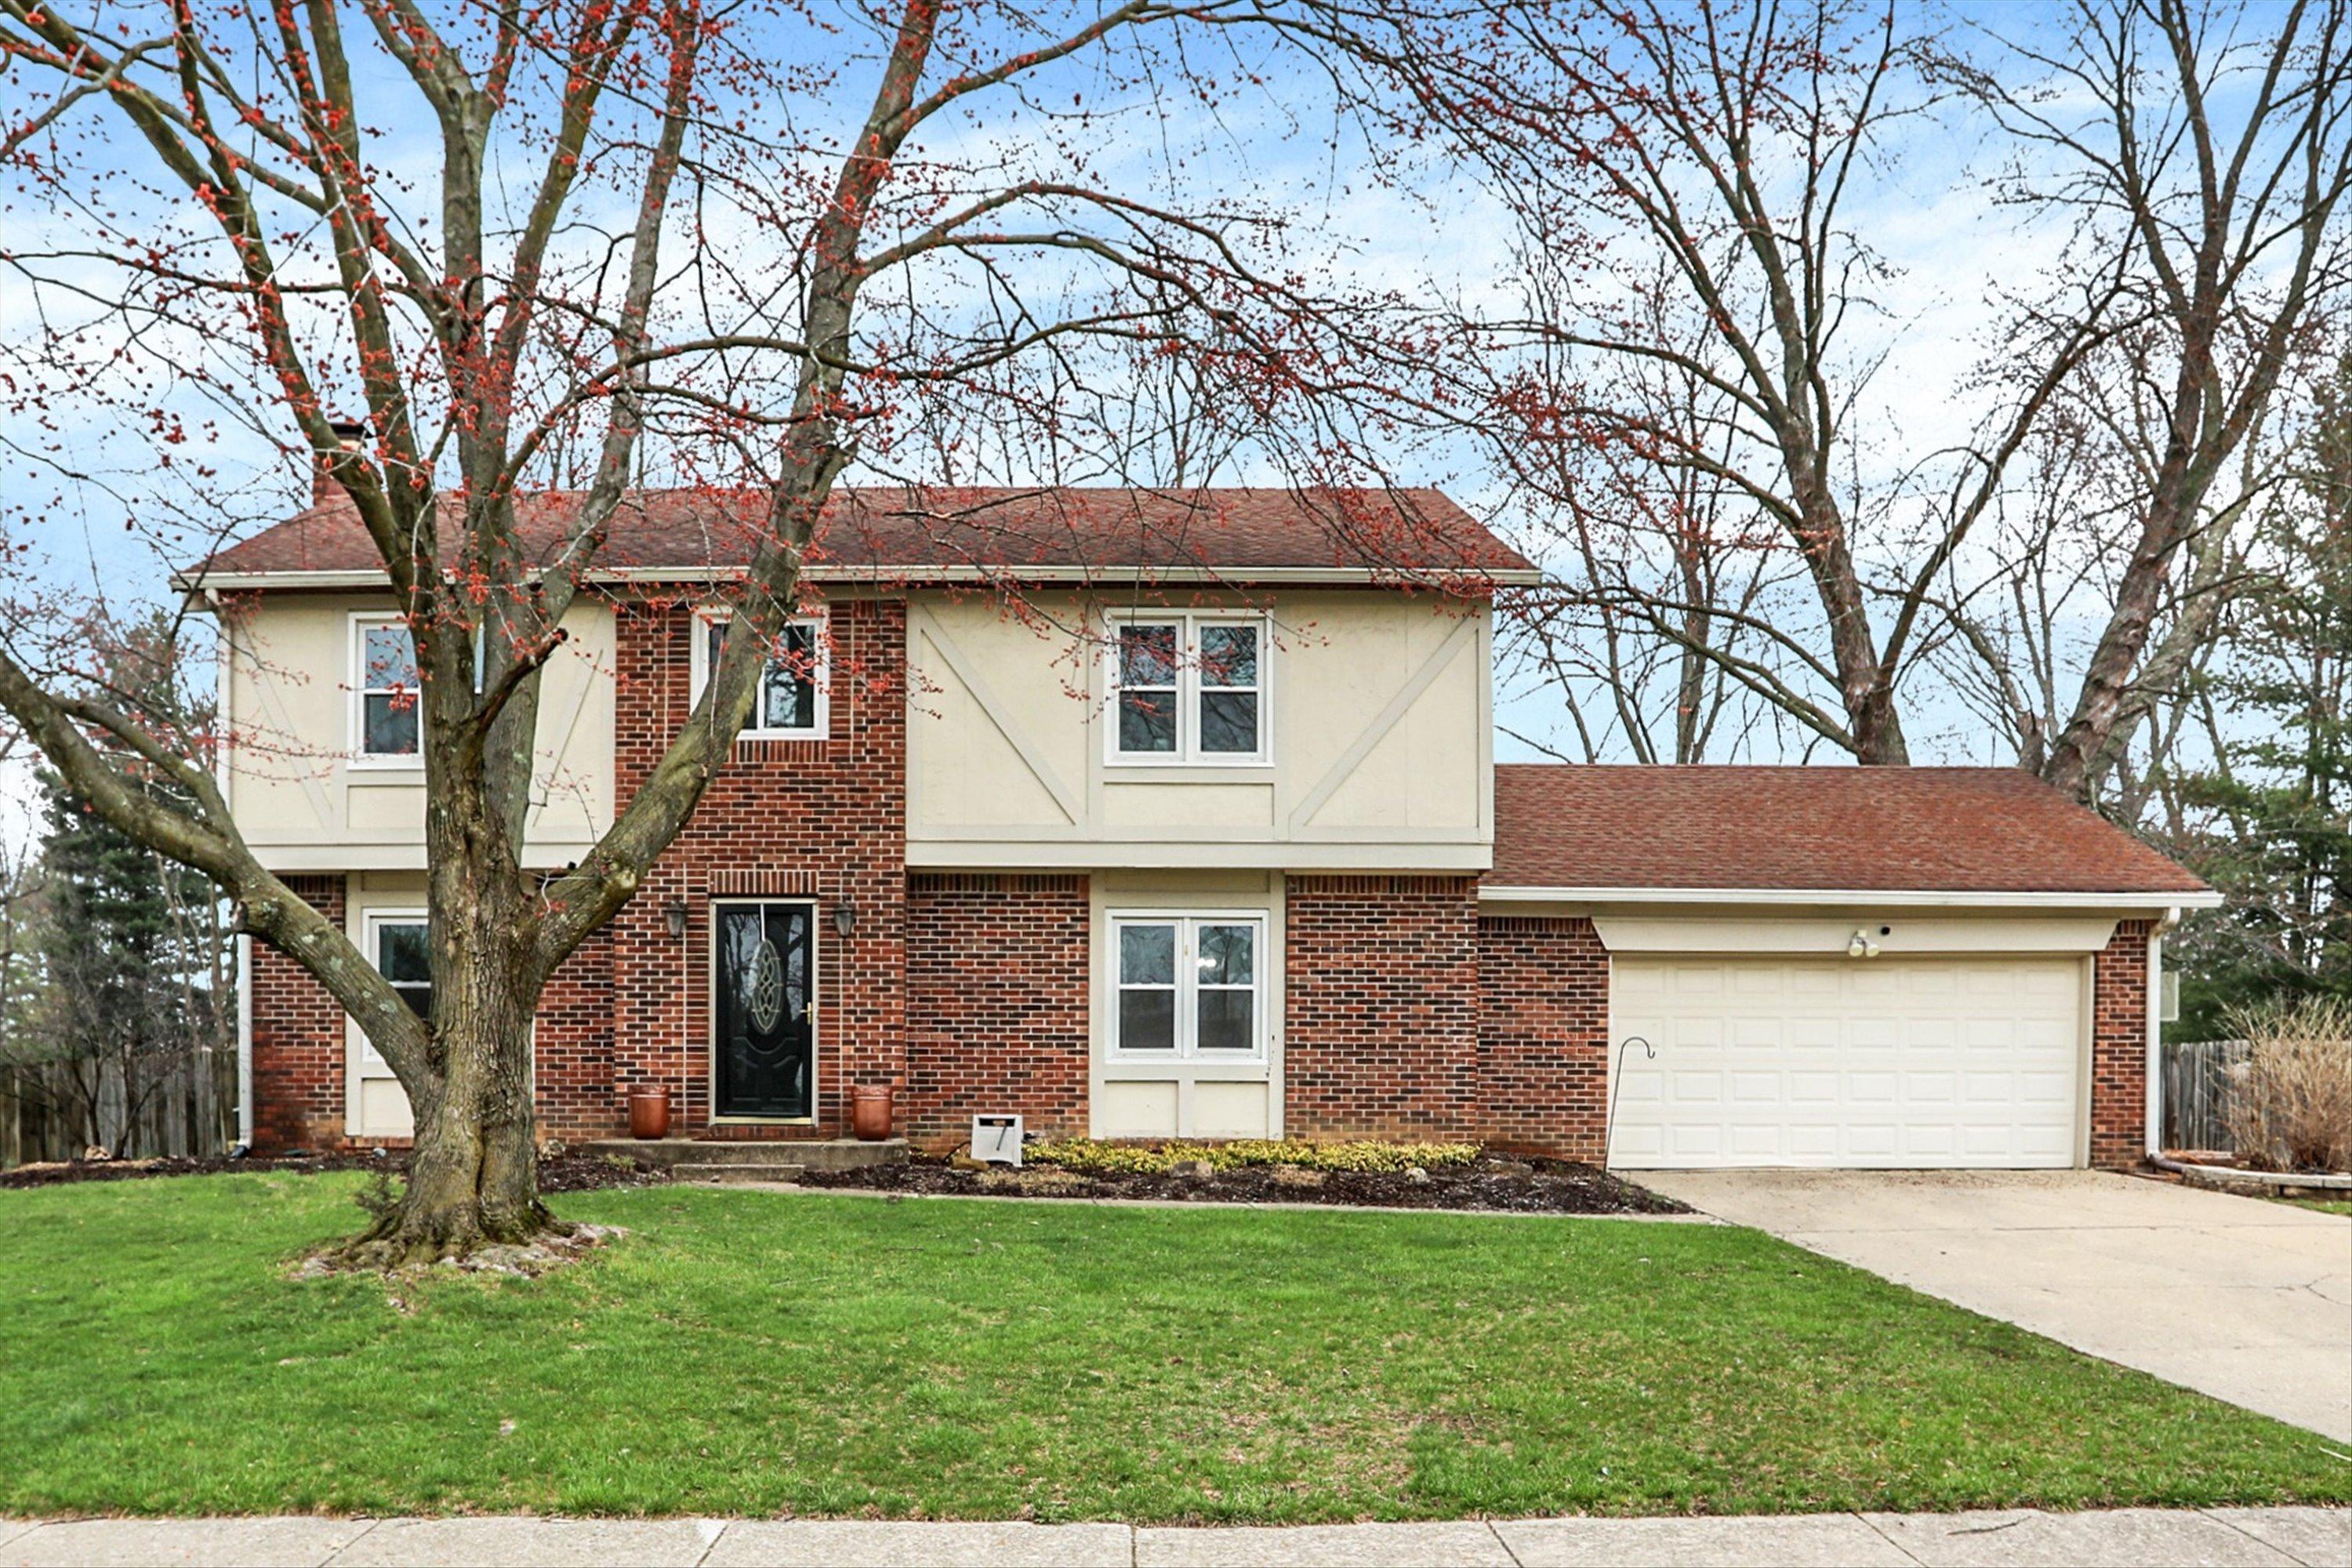 Photo one of 730 Queenswood Dr Indianapolis IN 46217 | MLS 21974945